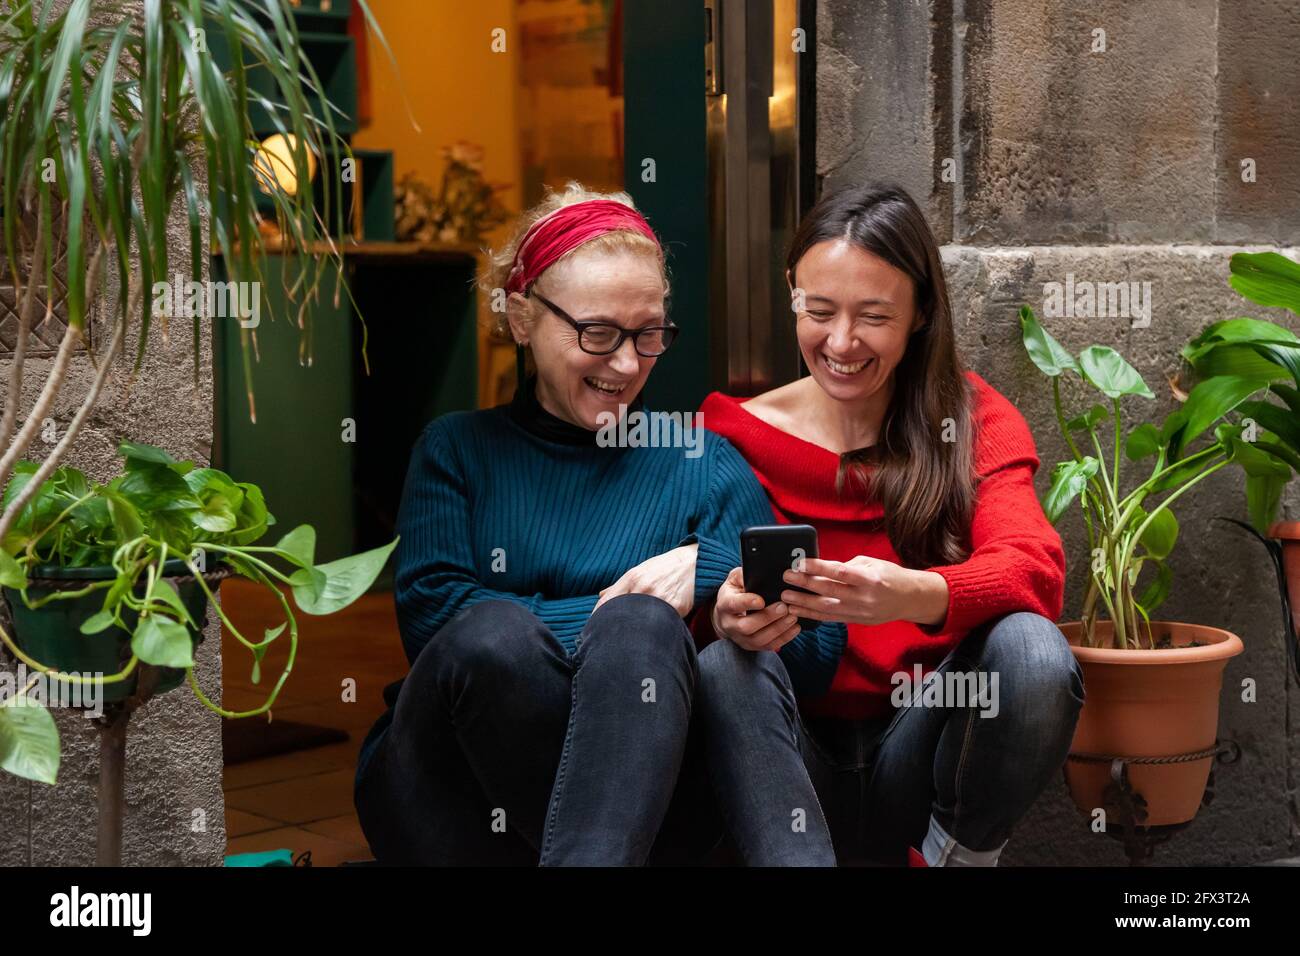 Two middle-aged women friends sitting close together with smart phone having fun in front of a shop. Concept: female friendship, closeness, everyday u Stock Photo